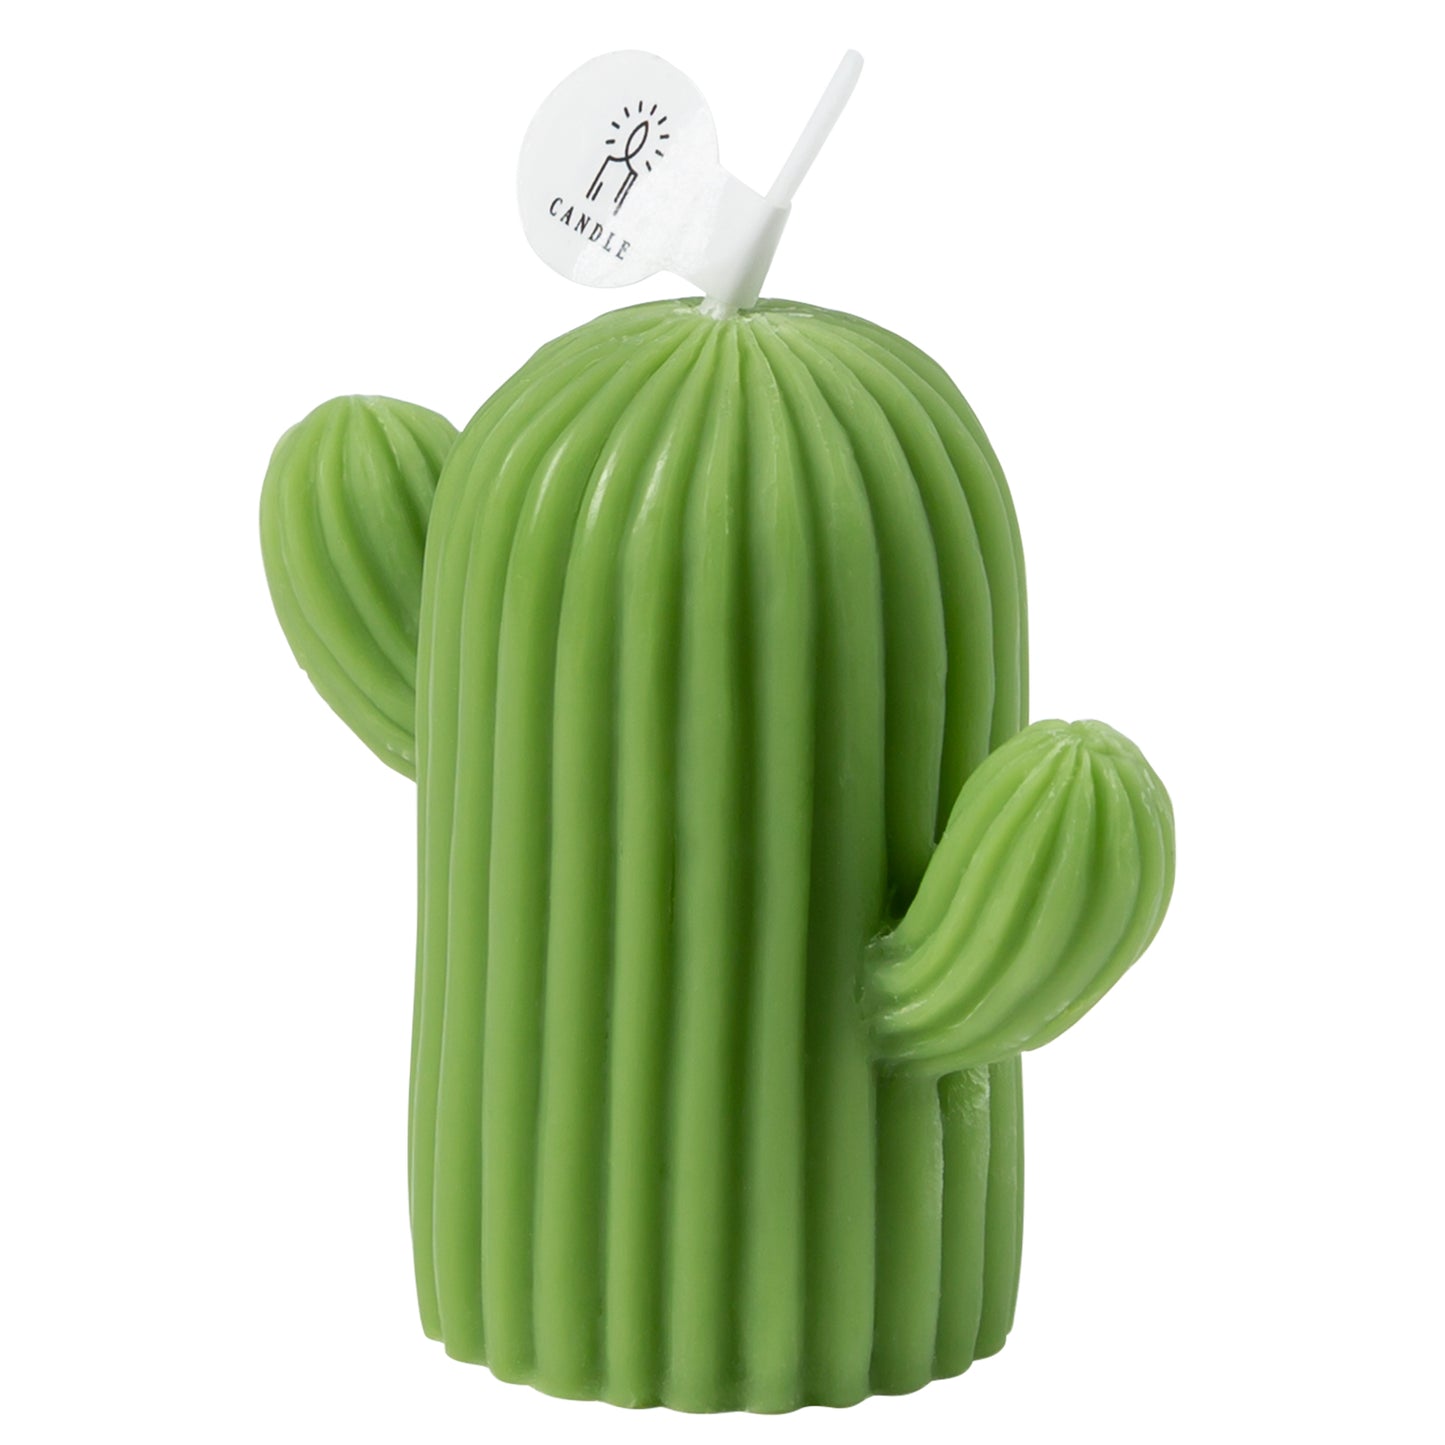 Rejuuv Cactus Shaped Scented Candle